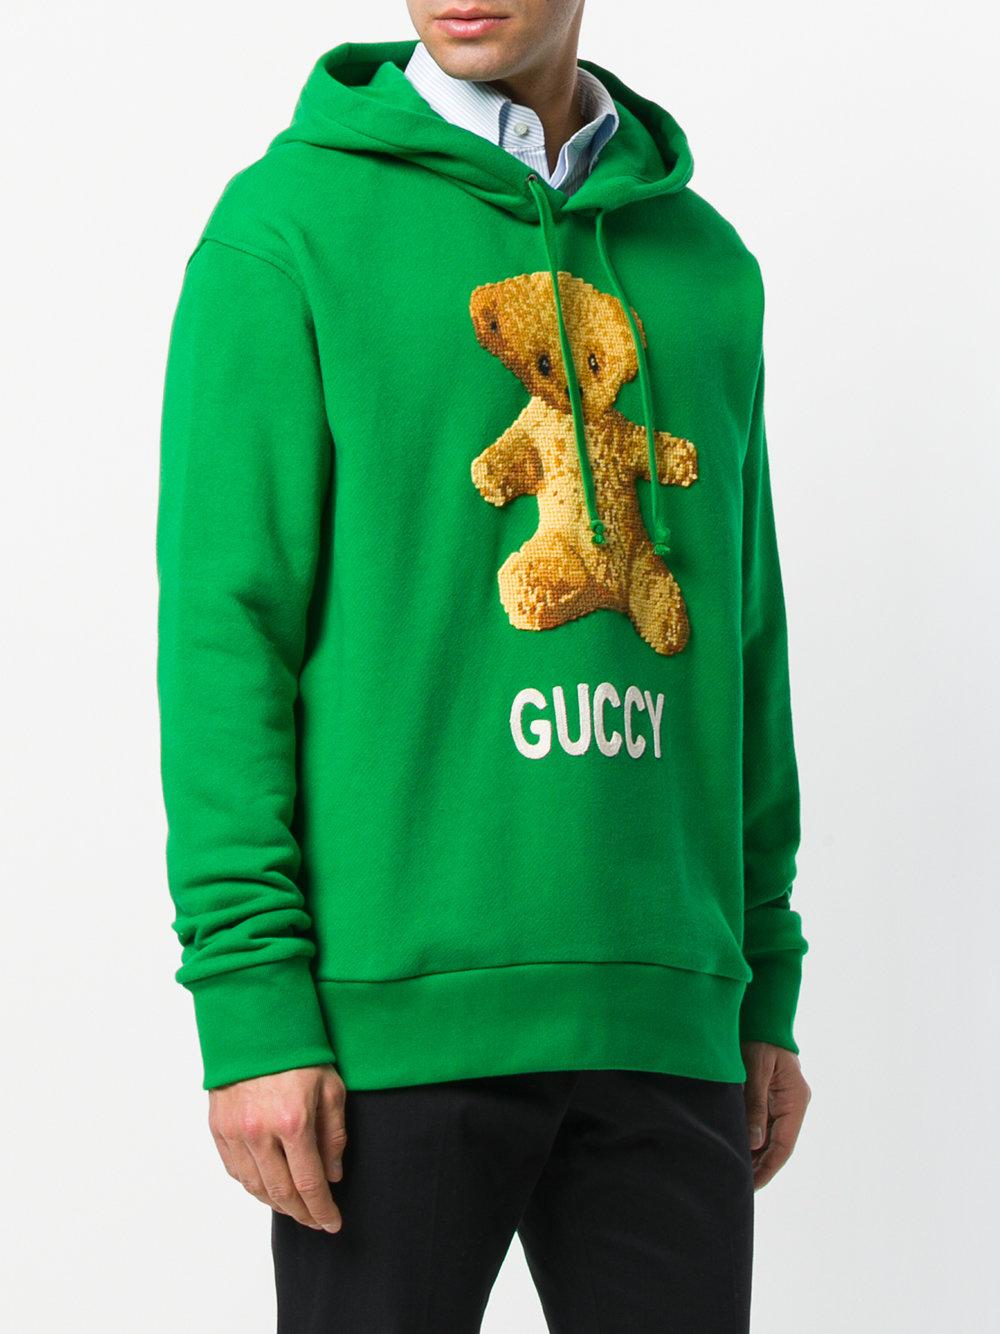 Gucci Cotton Embroidedered Teddy Hoodie in Green for Men - Lyst